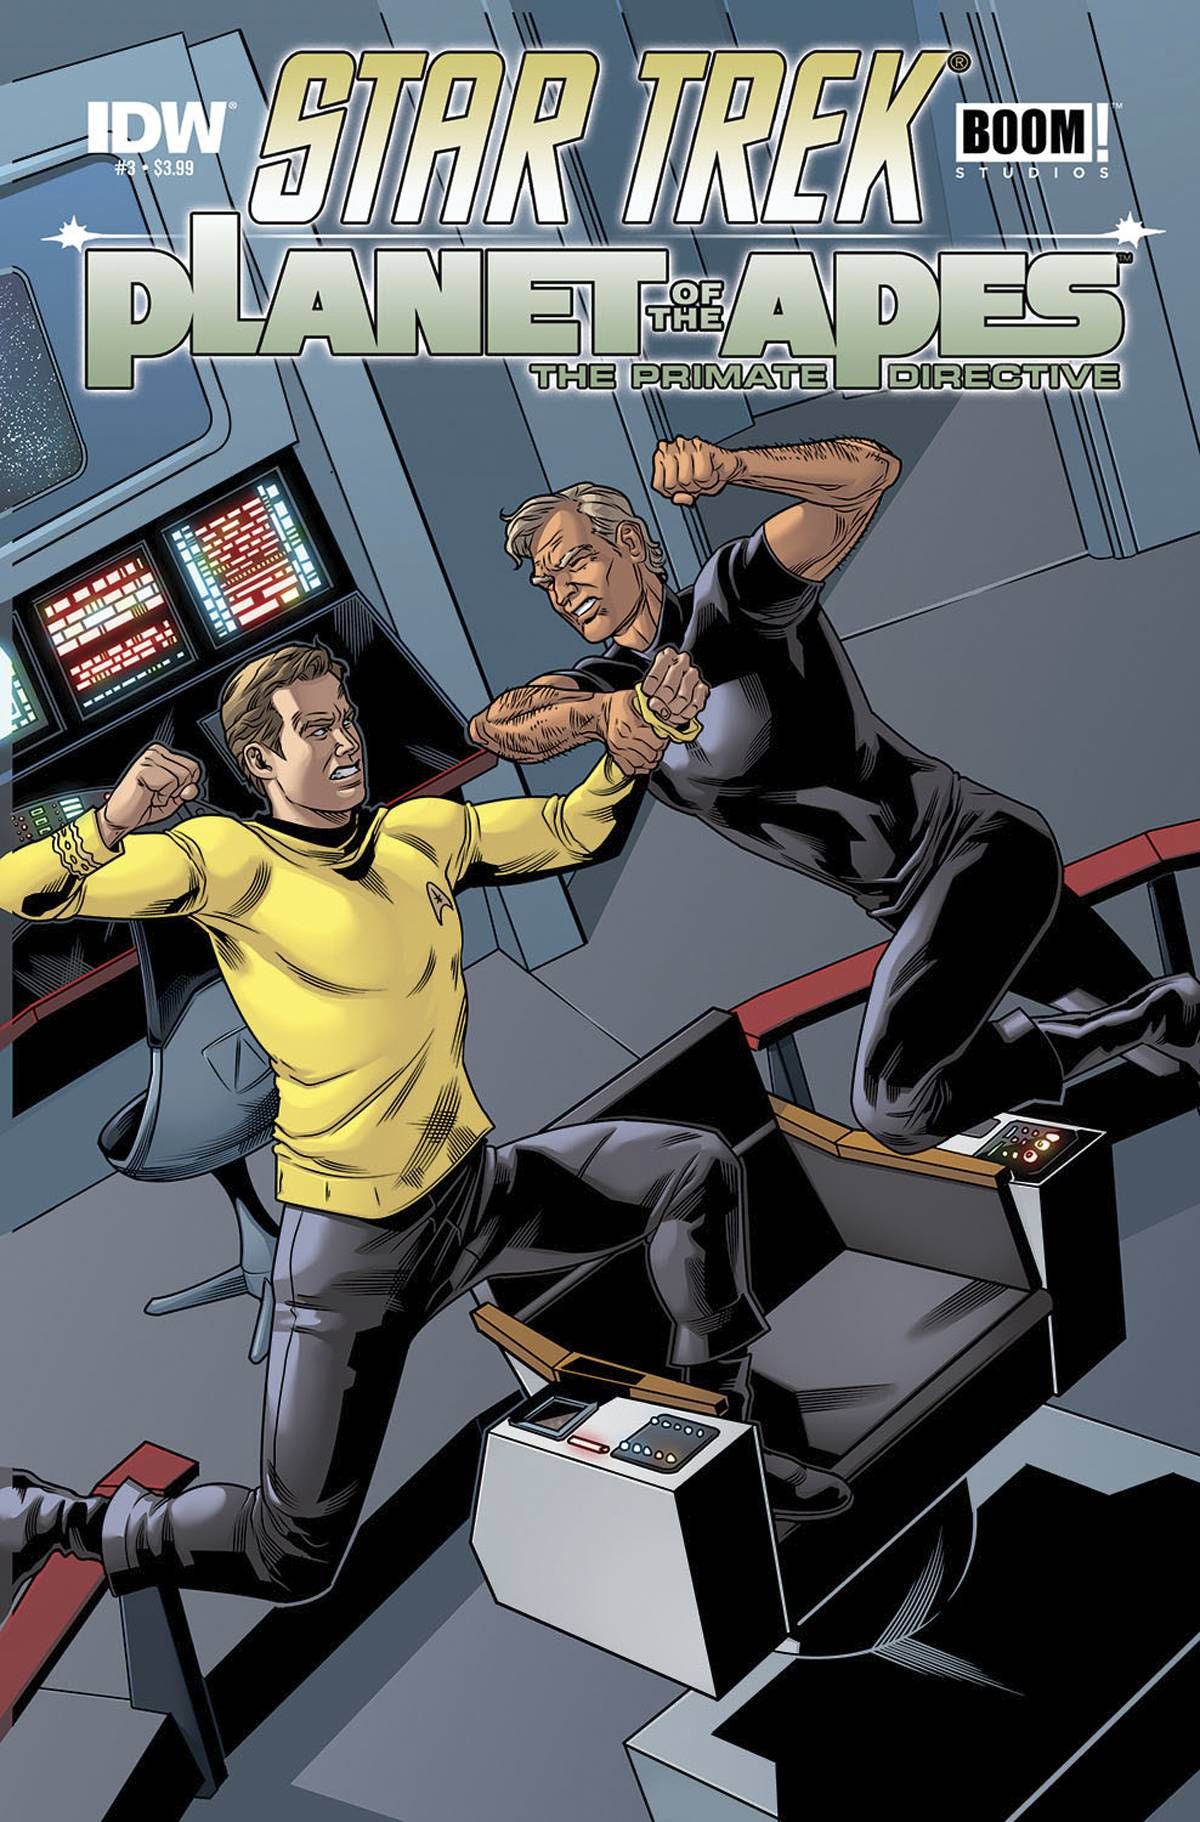 Star Trek/Planet of the Apes: The Primate Directive #3 Comic